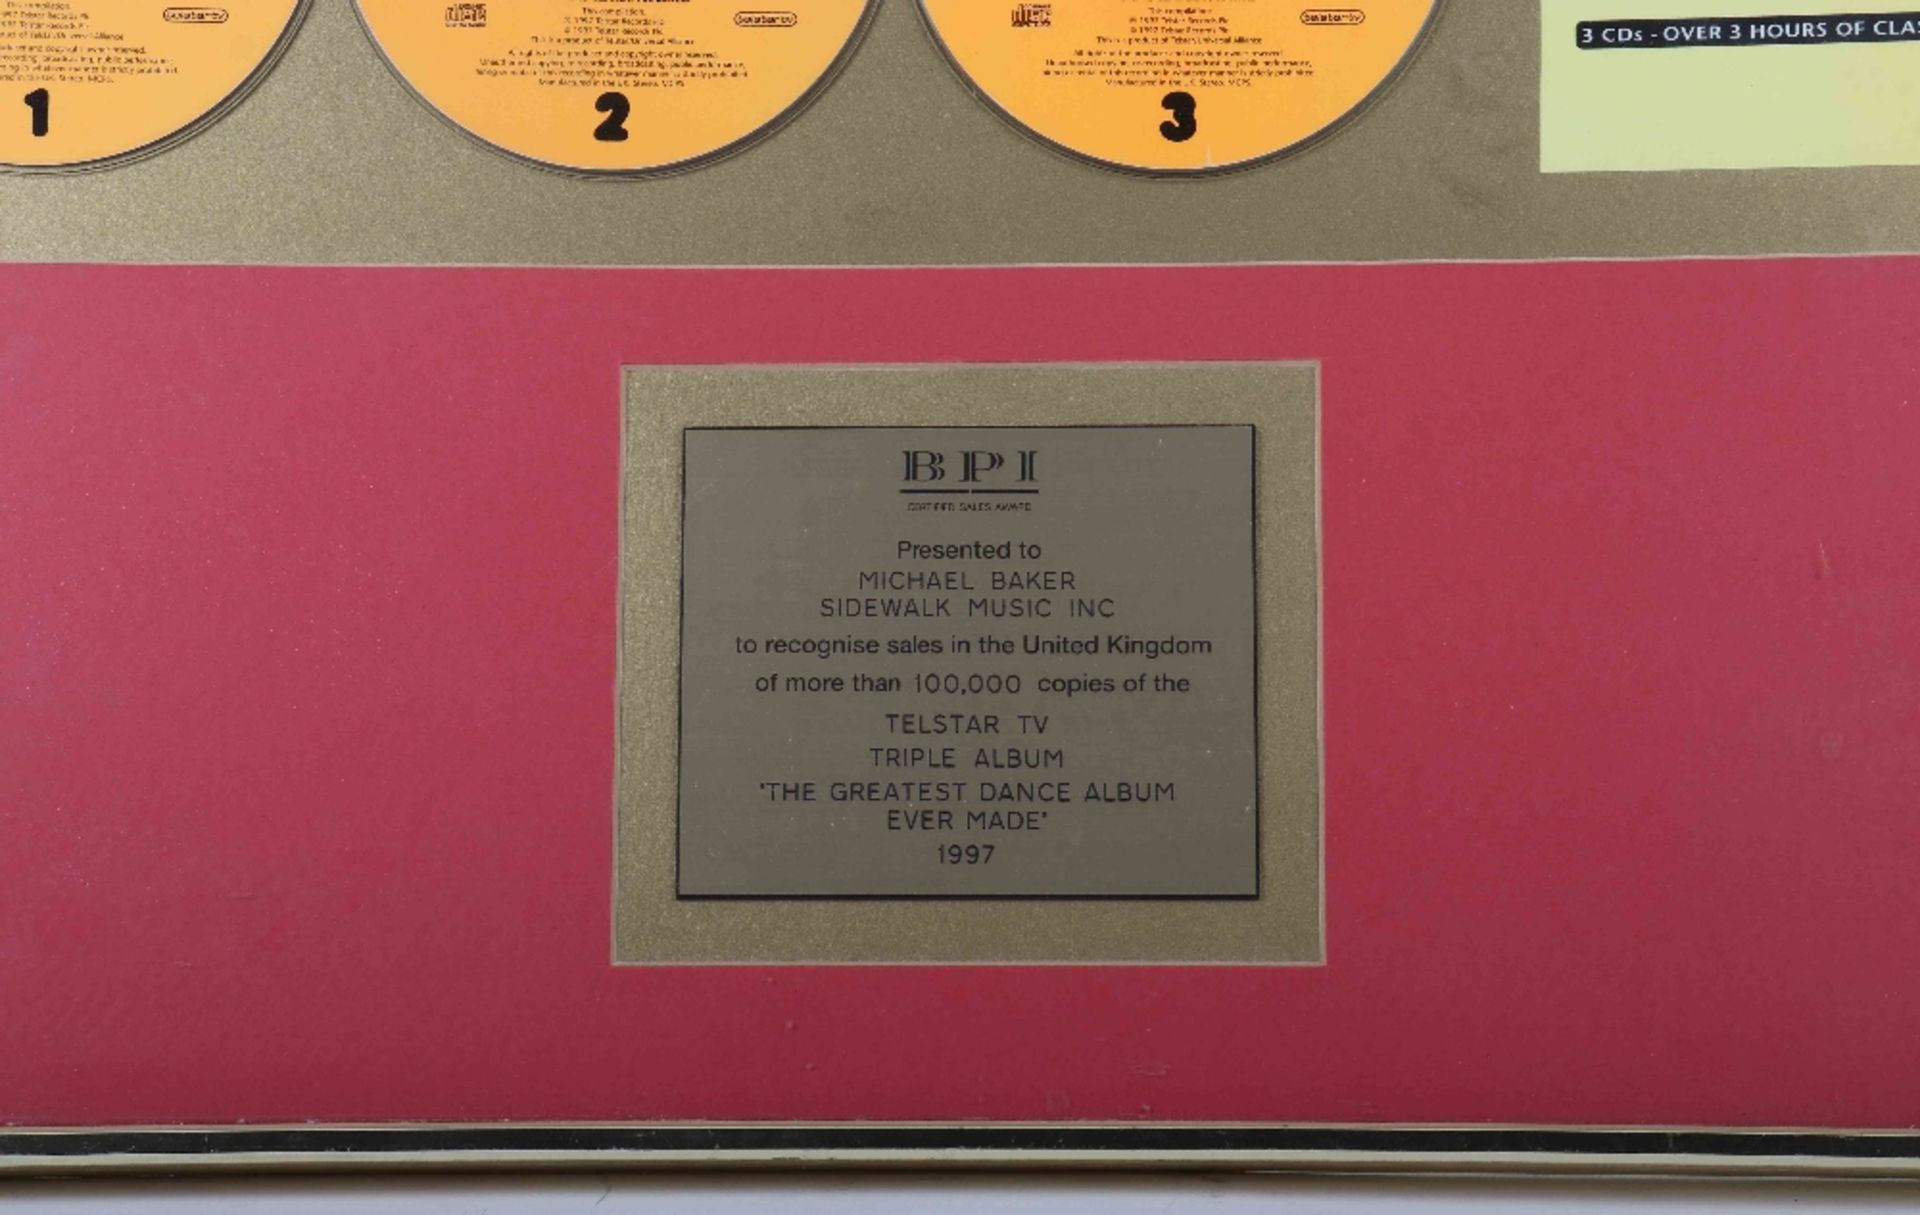 Triple album award by BPI for ‘Greatest Dance Album Ever Made’ of sales in the UK of over 100,000 co - Image 2 of 4